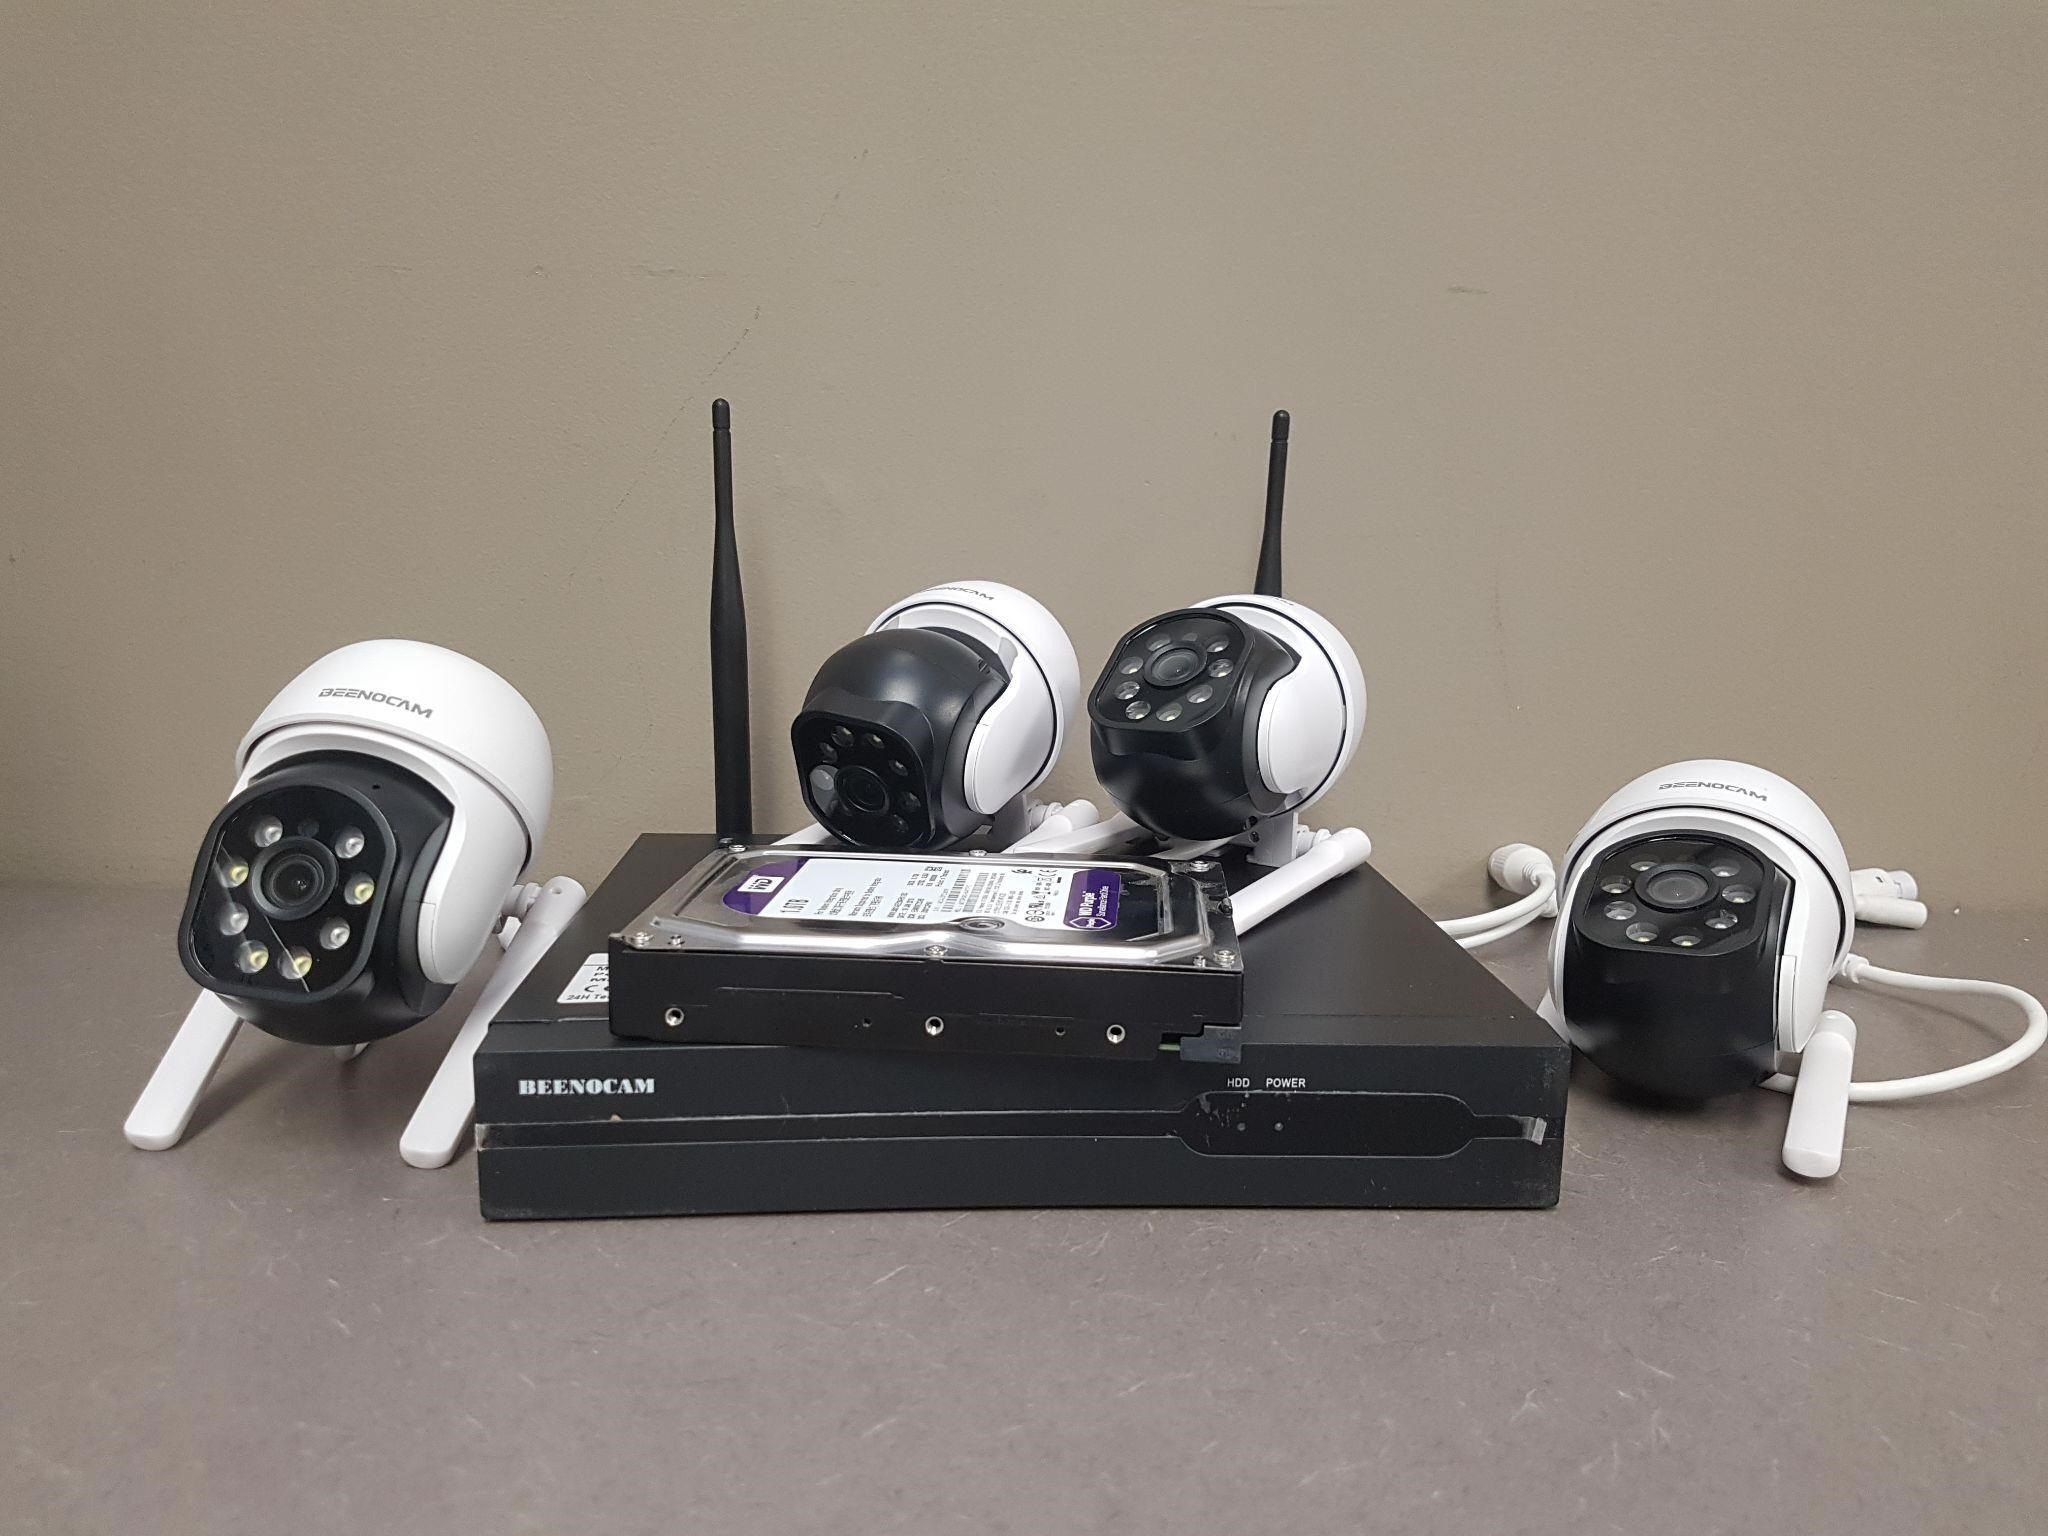 8 Channel WIFI NVR Kits with 4 Cameras + 1TB HDD